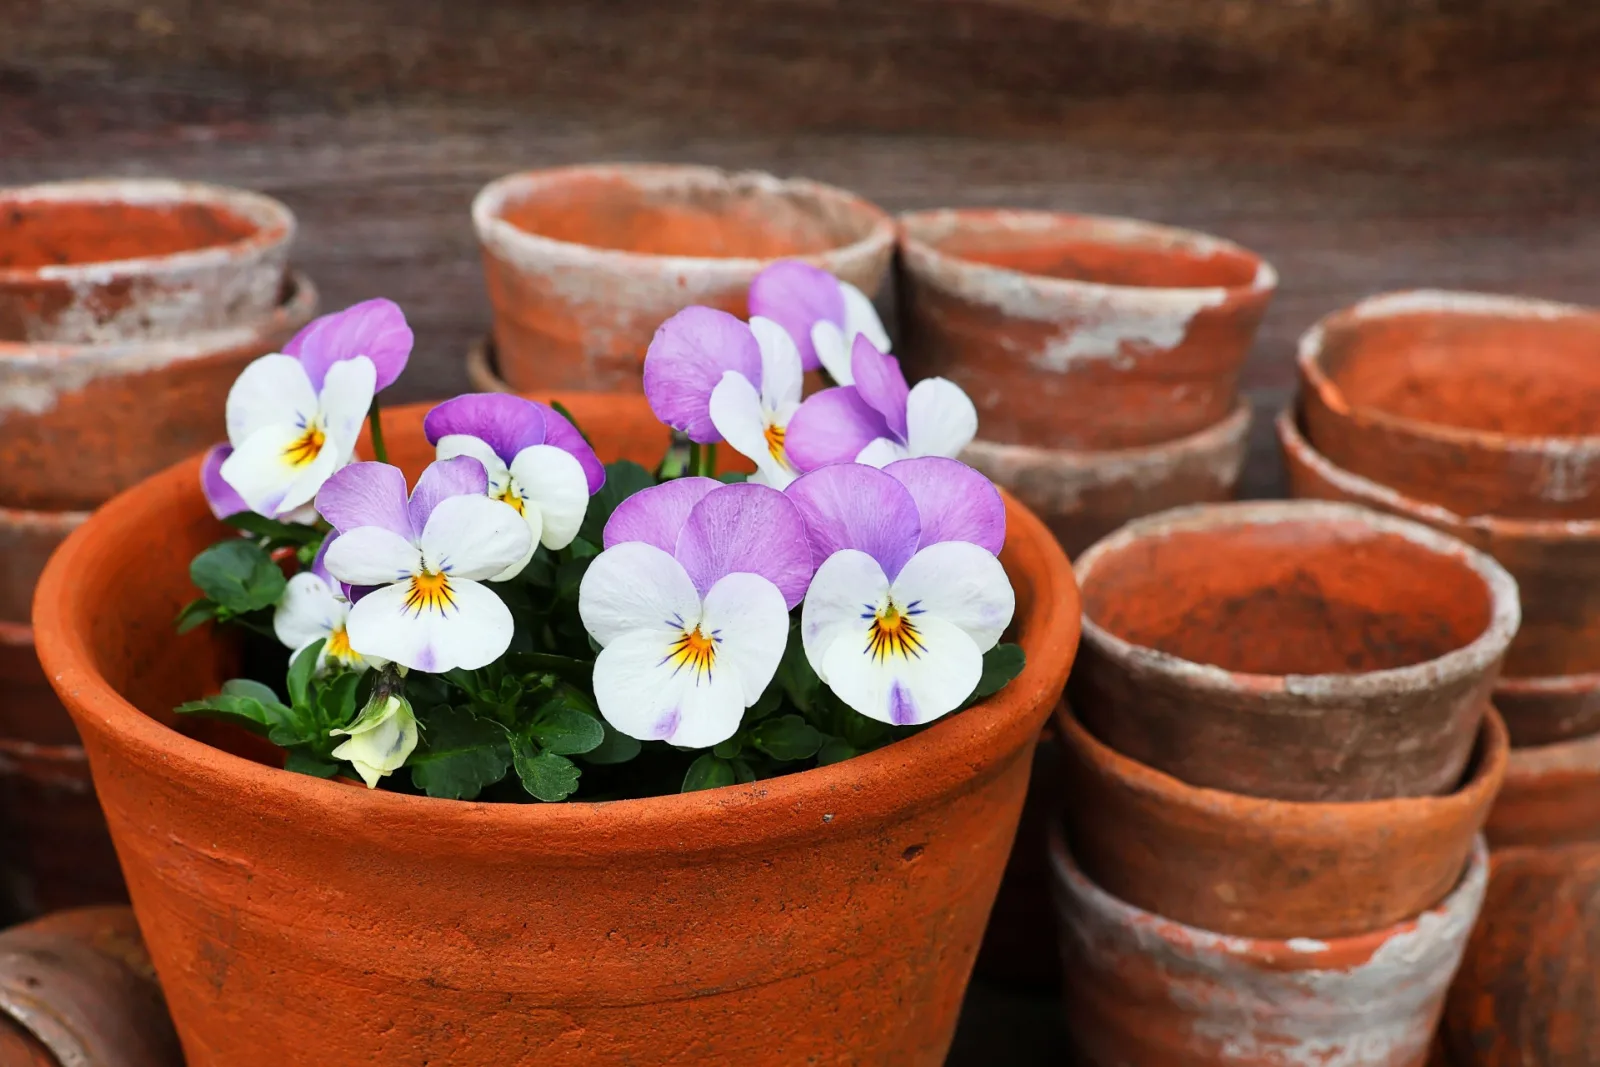 Pansy flowers in a terracotta pot on a table